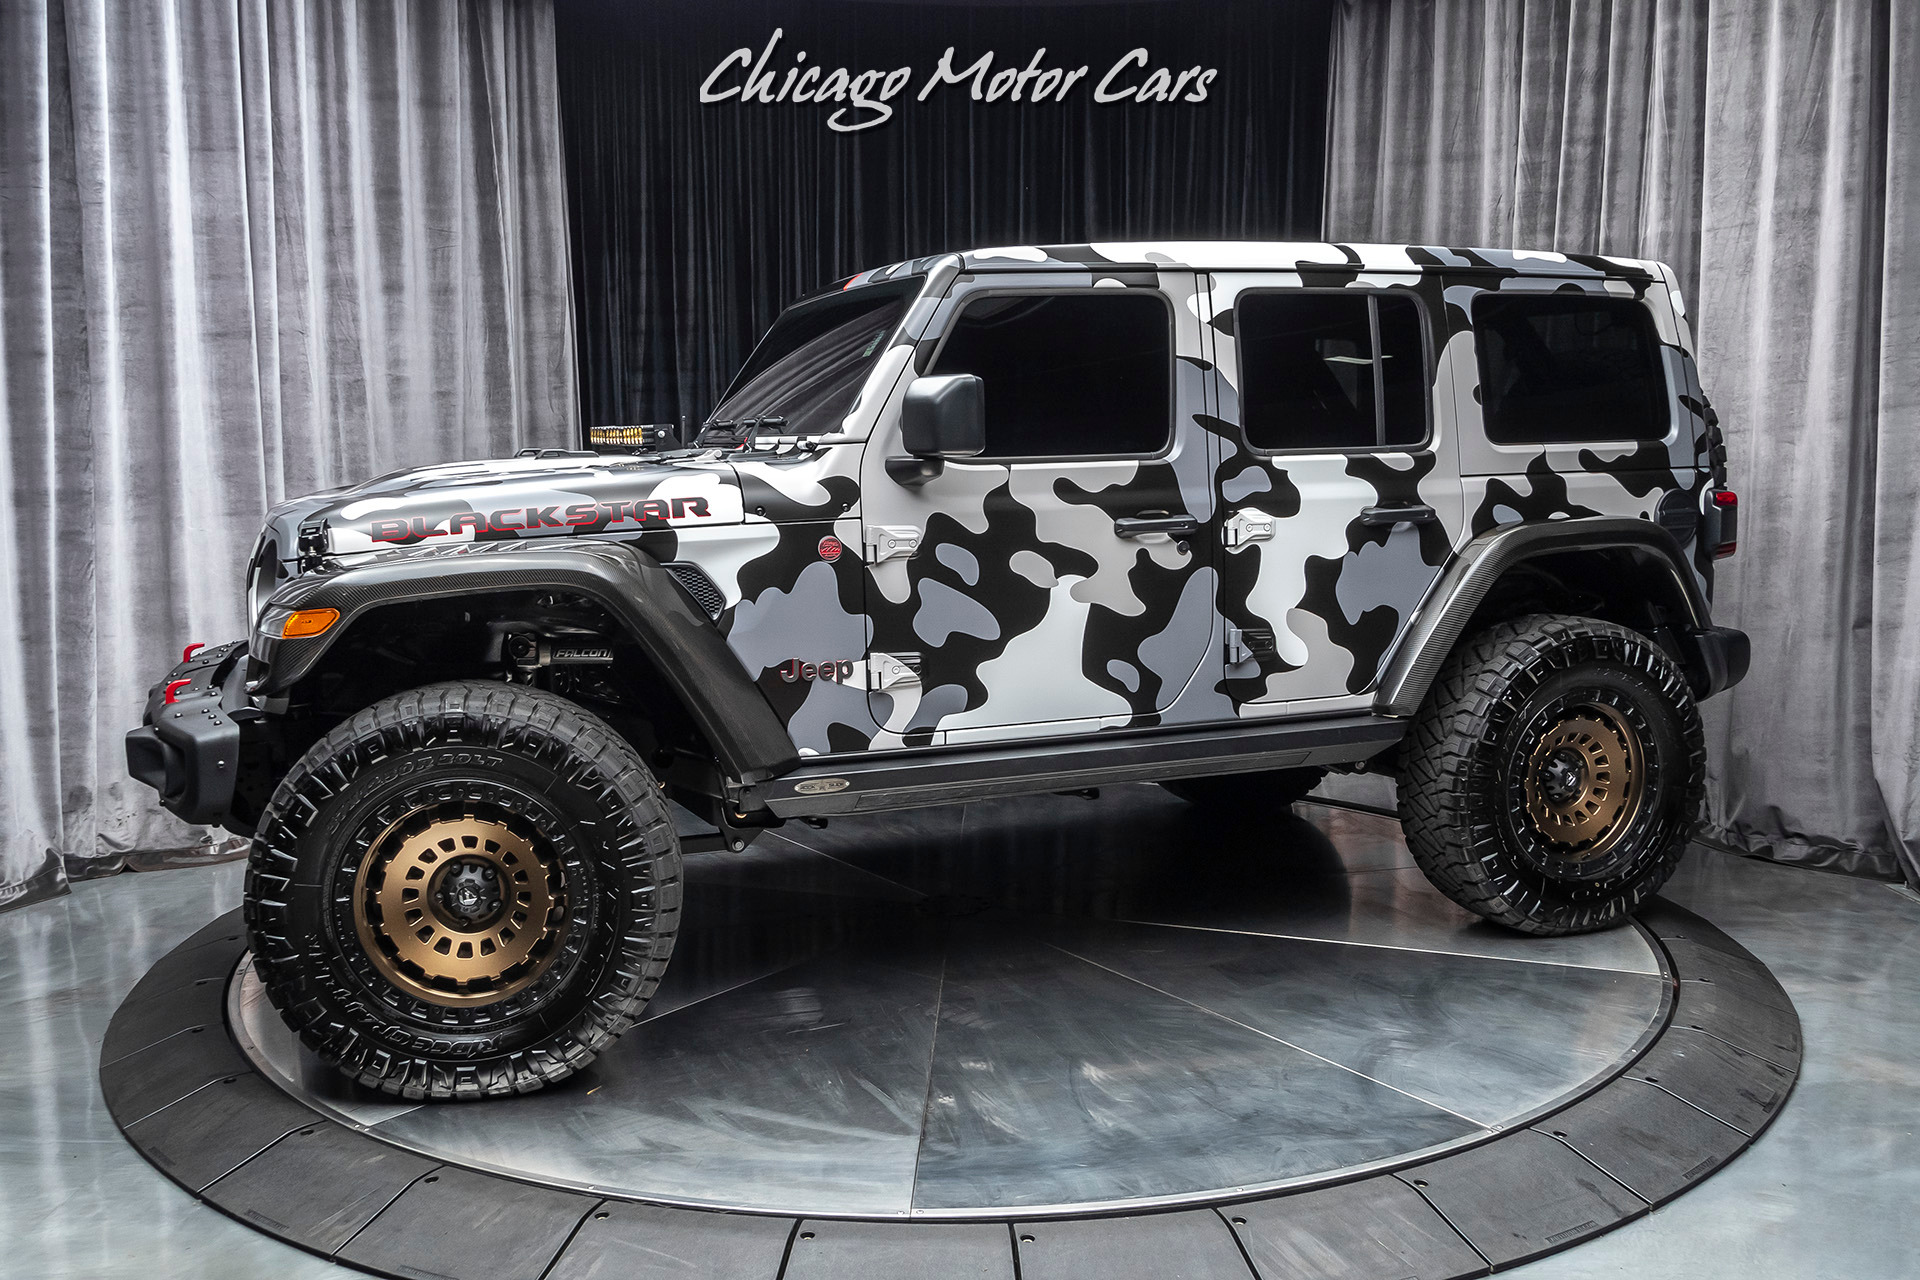 Used-2020-Jeep-Wrangler-Unlimited-Rubicon-Supercharged-Only-9618-Miles-Over-40k-In-Upgrades